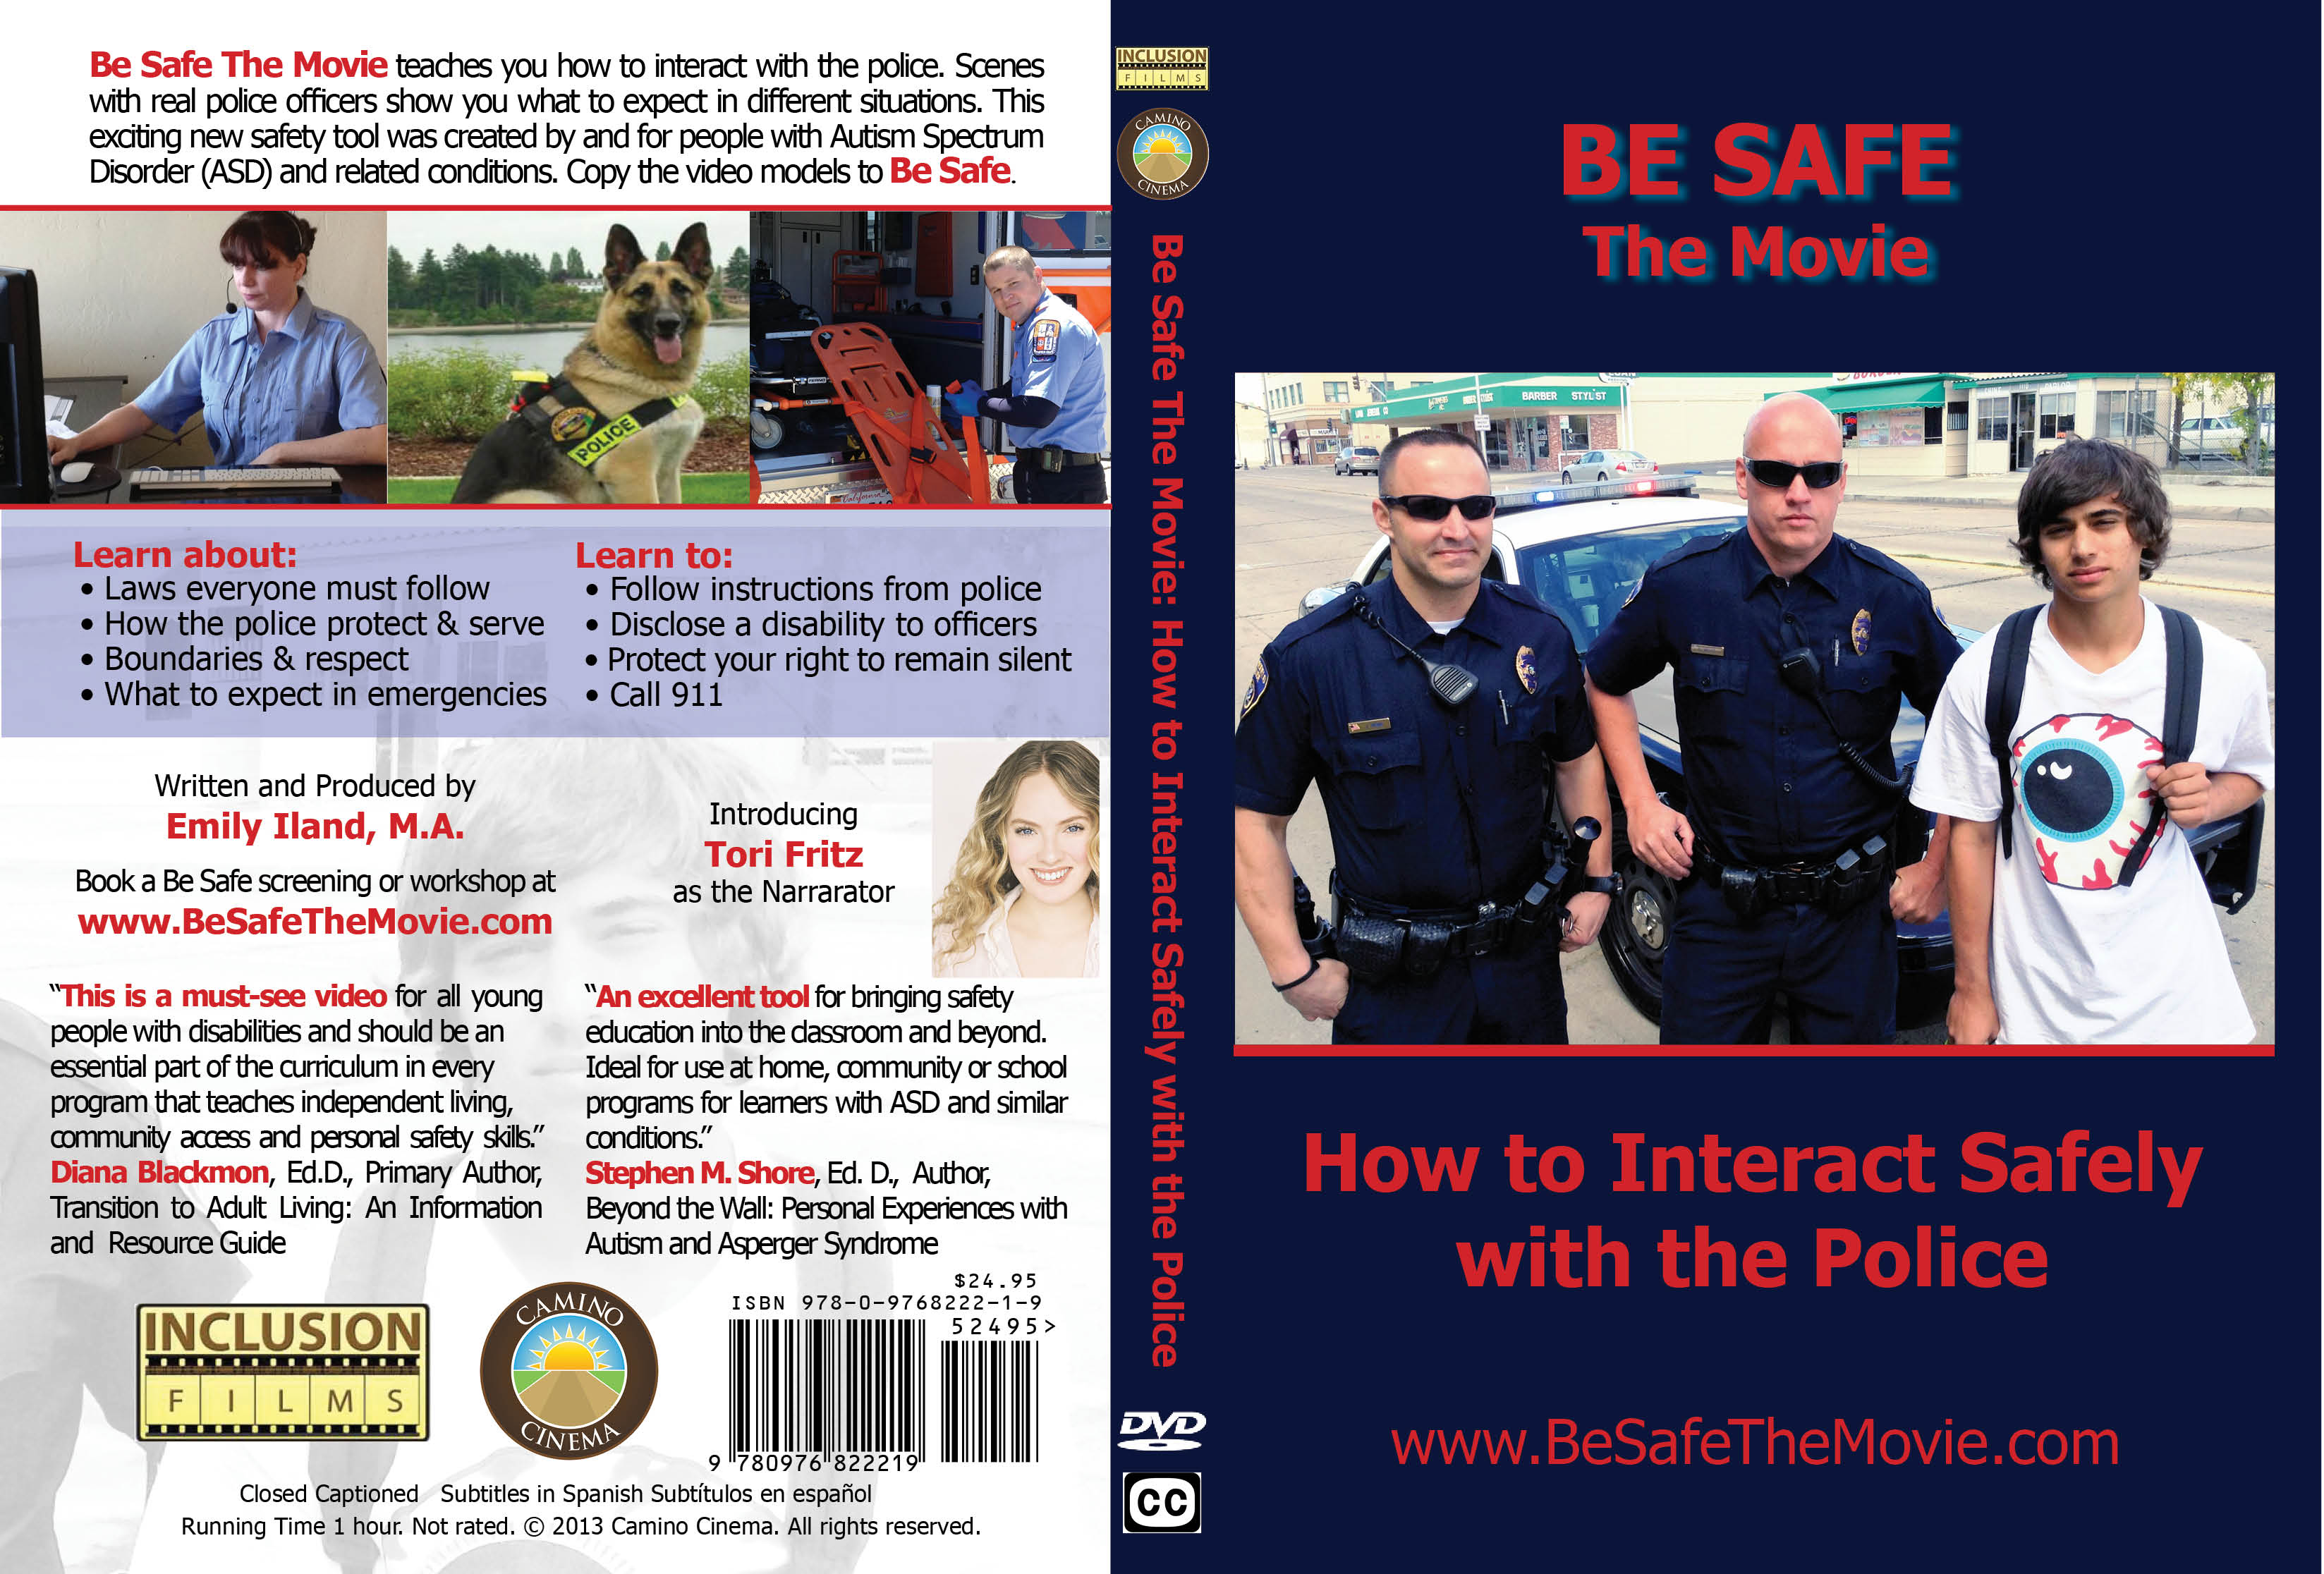 BE SAFE The Movie on DVD